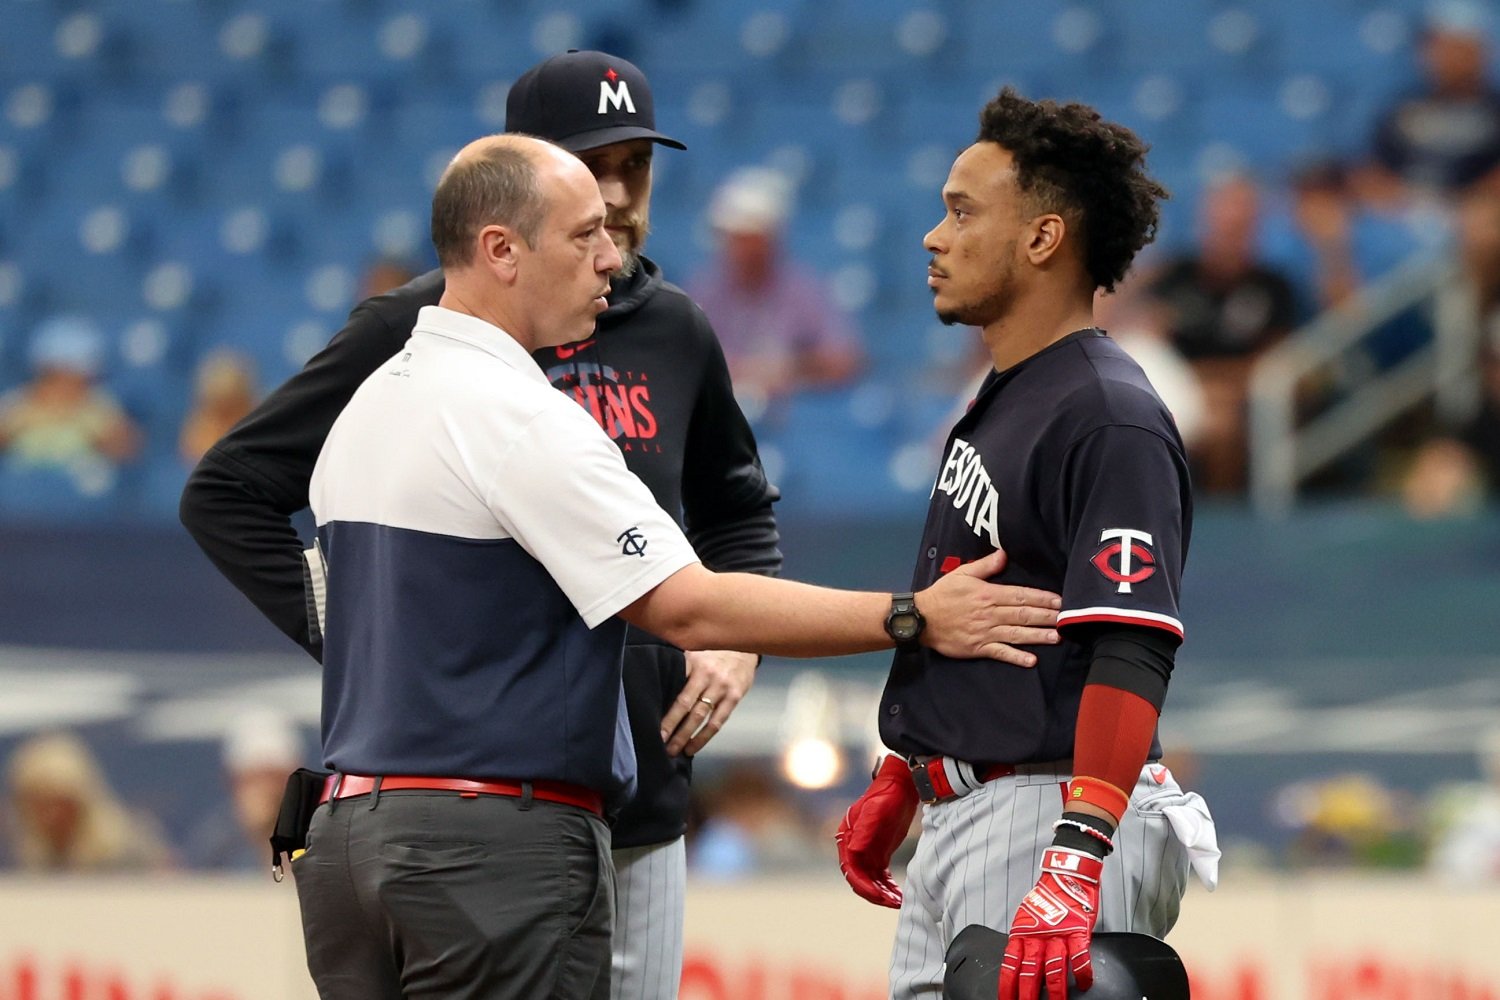 Jorge Polanco's Mounting Injury Concerns and Looming Option